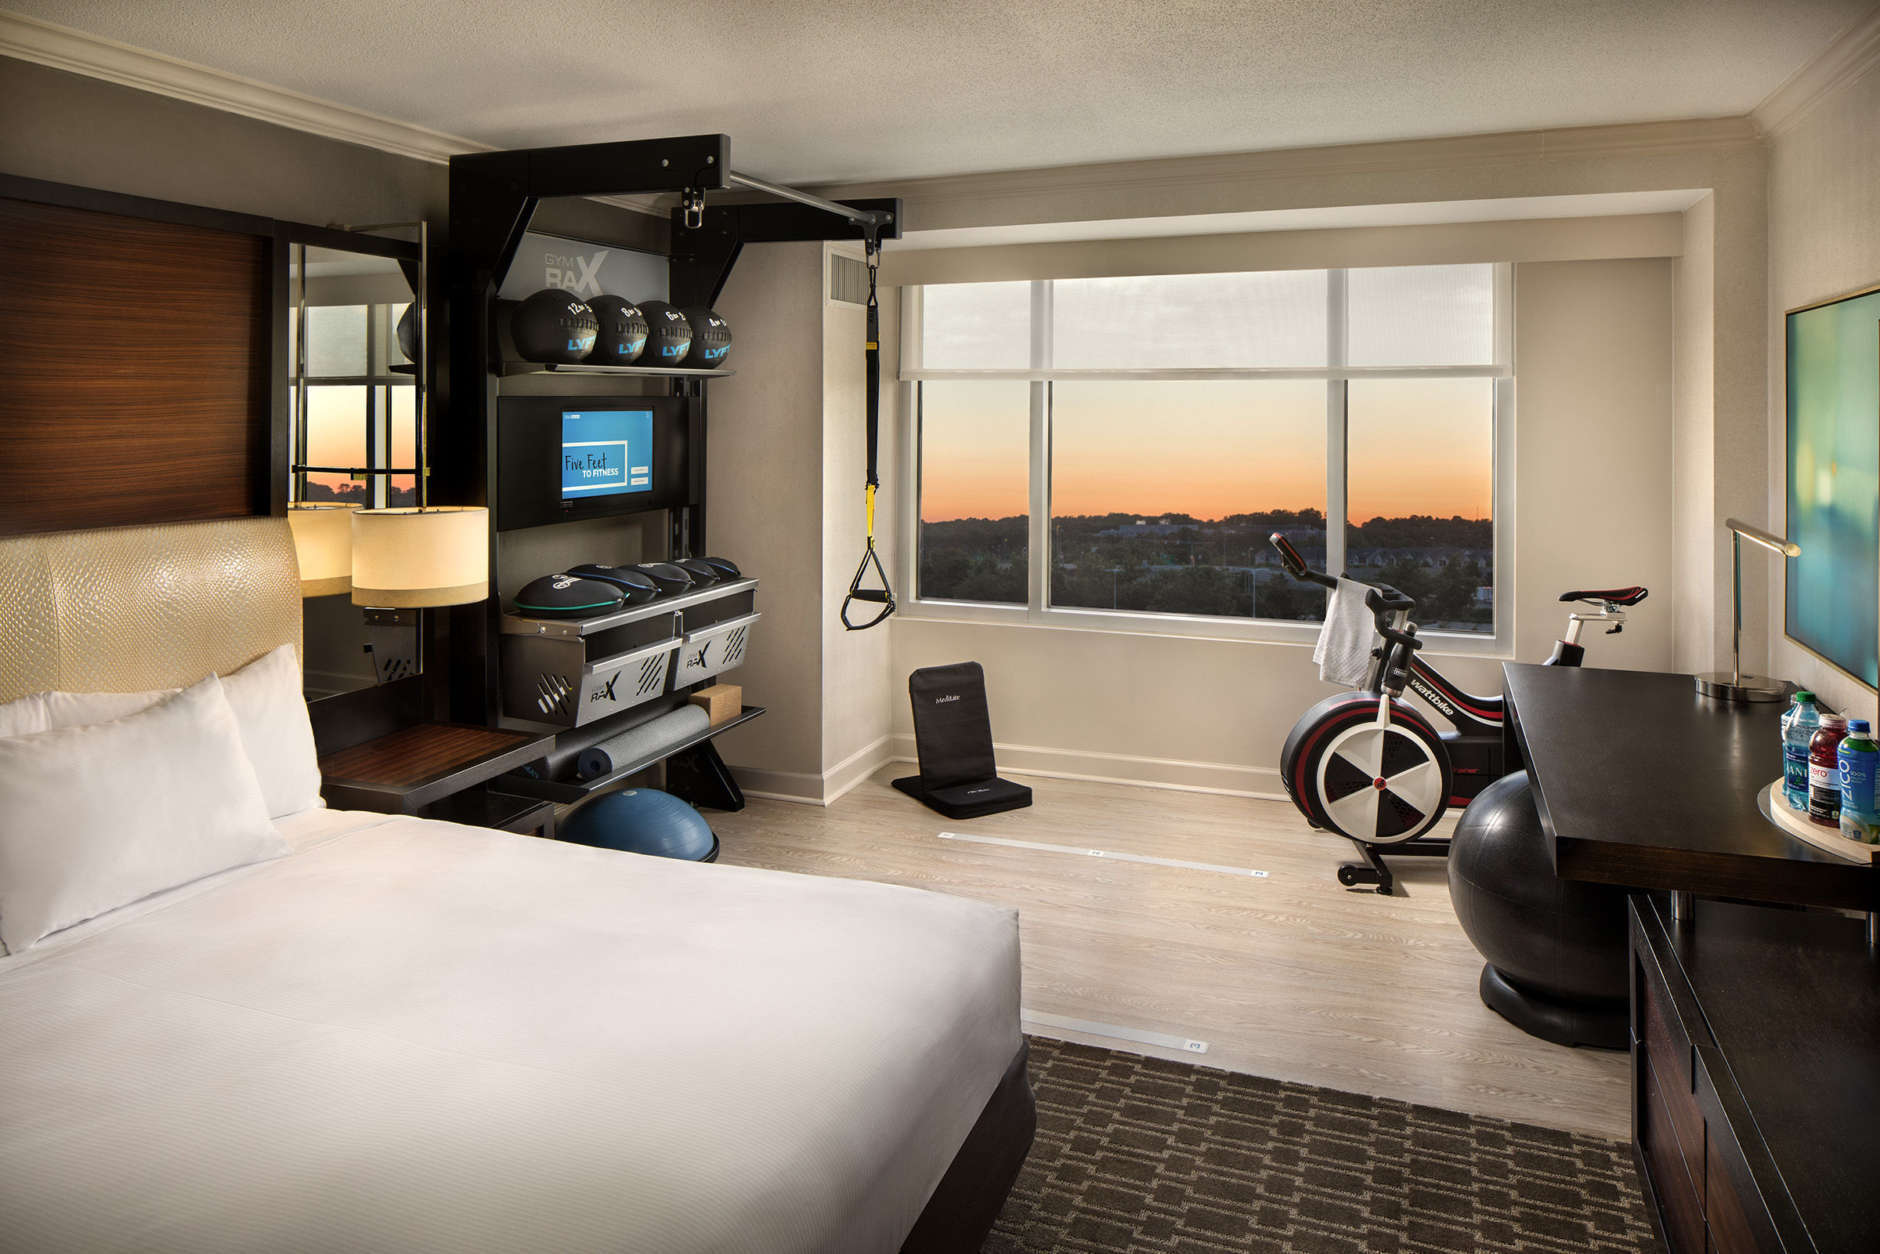 At Hilton McLean Tysons Corner, there's no need to rush down to the gym to squeeze in your morning workout. A handful of rooms in the Northern Virginia hotel come equipped with their own personal gyms — complete with a stationary bike, a meditation chair, a yoga mat and a dynamic GymRax training station for core, strength and high-intensity interval training workouts. (Courtesy Hilton Hotels & Resorts)